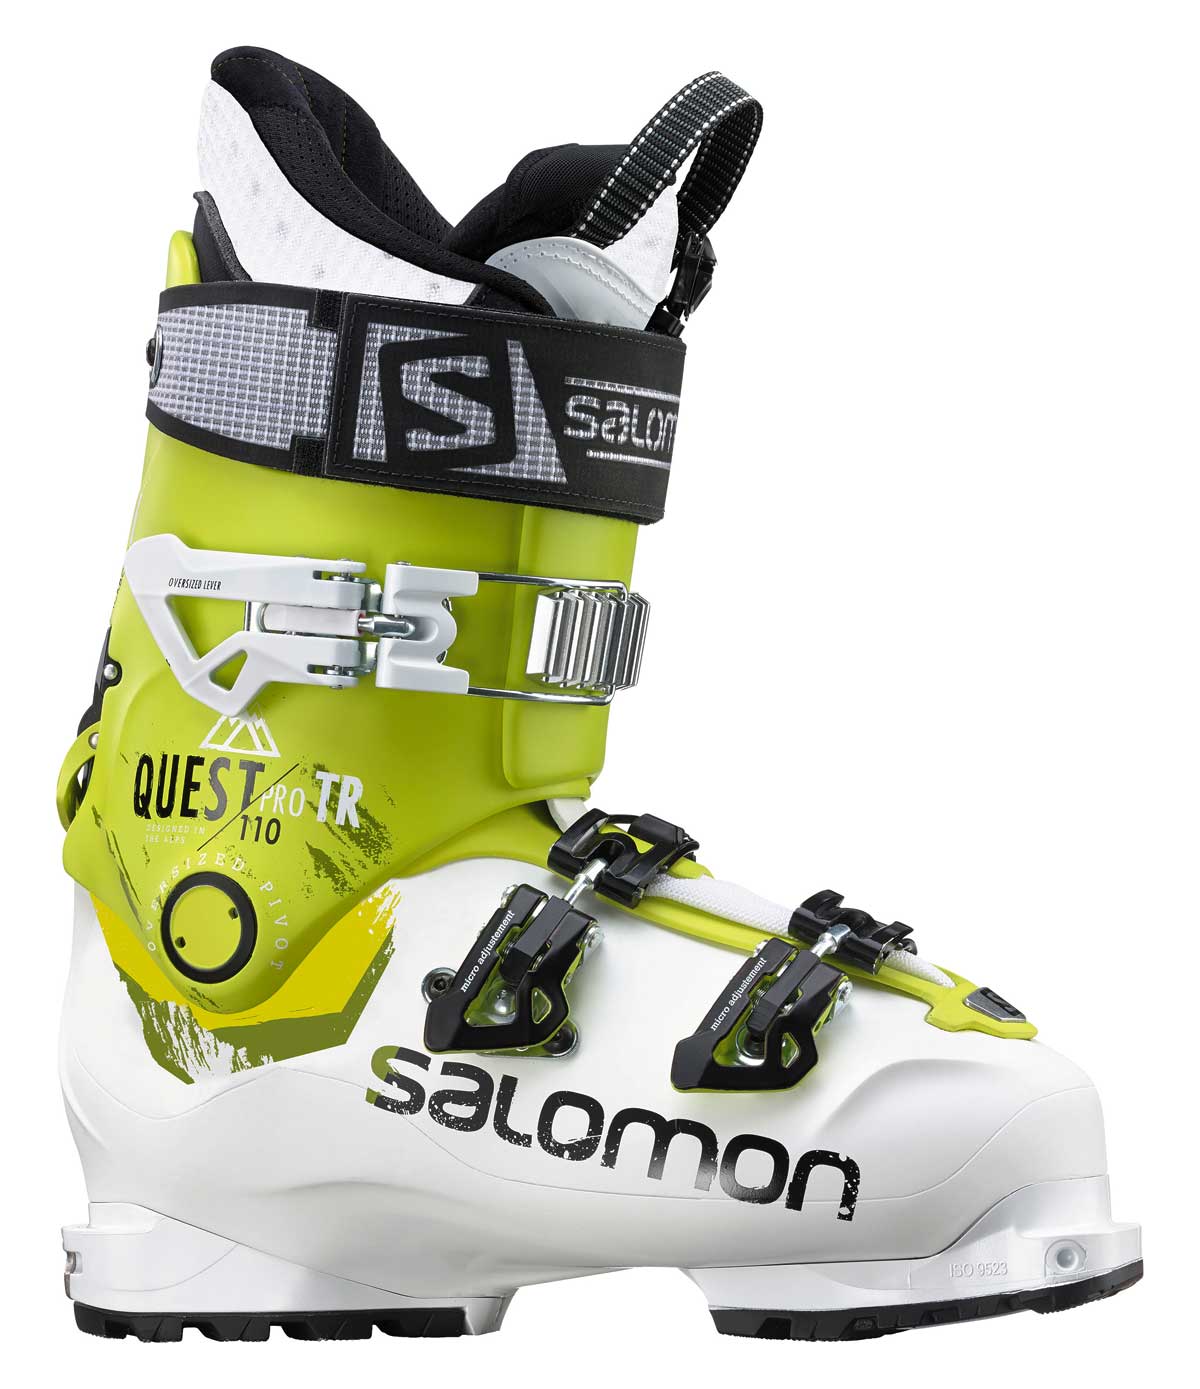 Børnepalads dynasti flyde over Review: Salomon Quest Pro TR 110 - EarnYourTurns